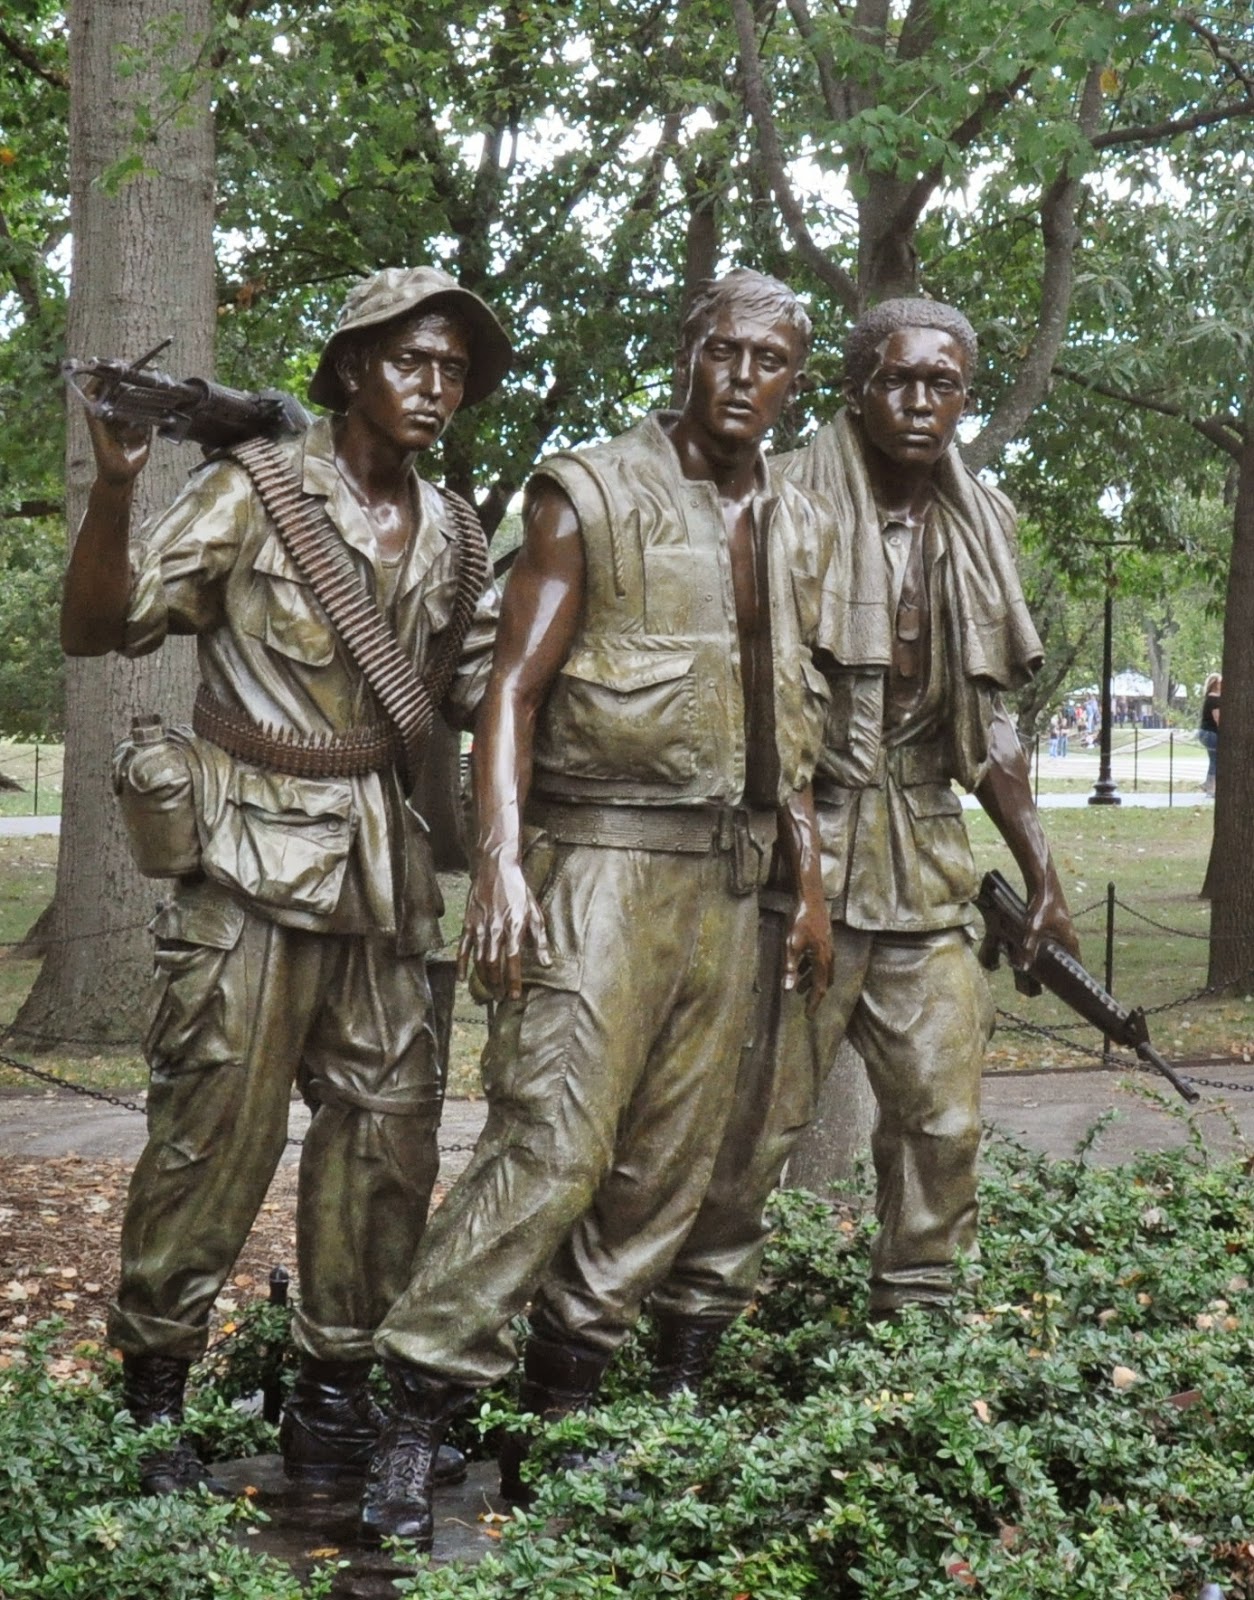 A GREAT EUROPE TRIP PLANNER: THE TRADITIONAL VIETNAM MEMORIAL SCULPTURE